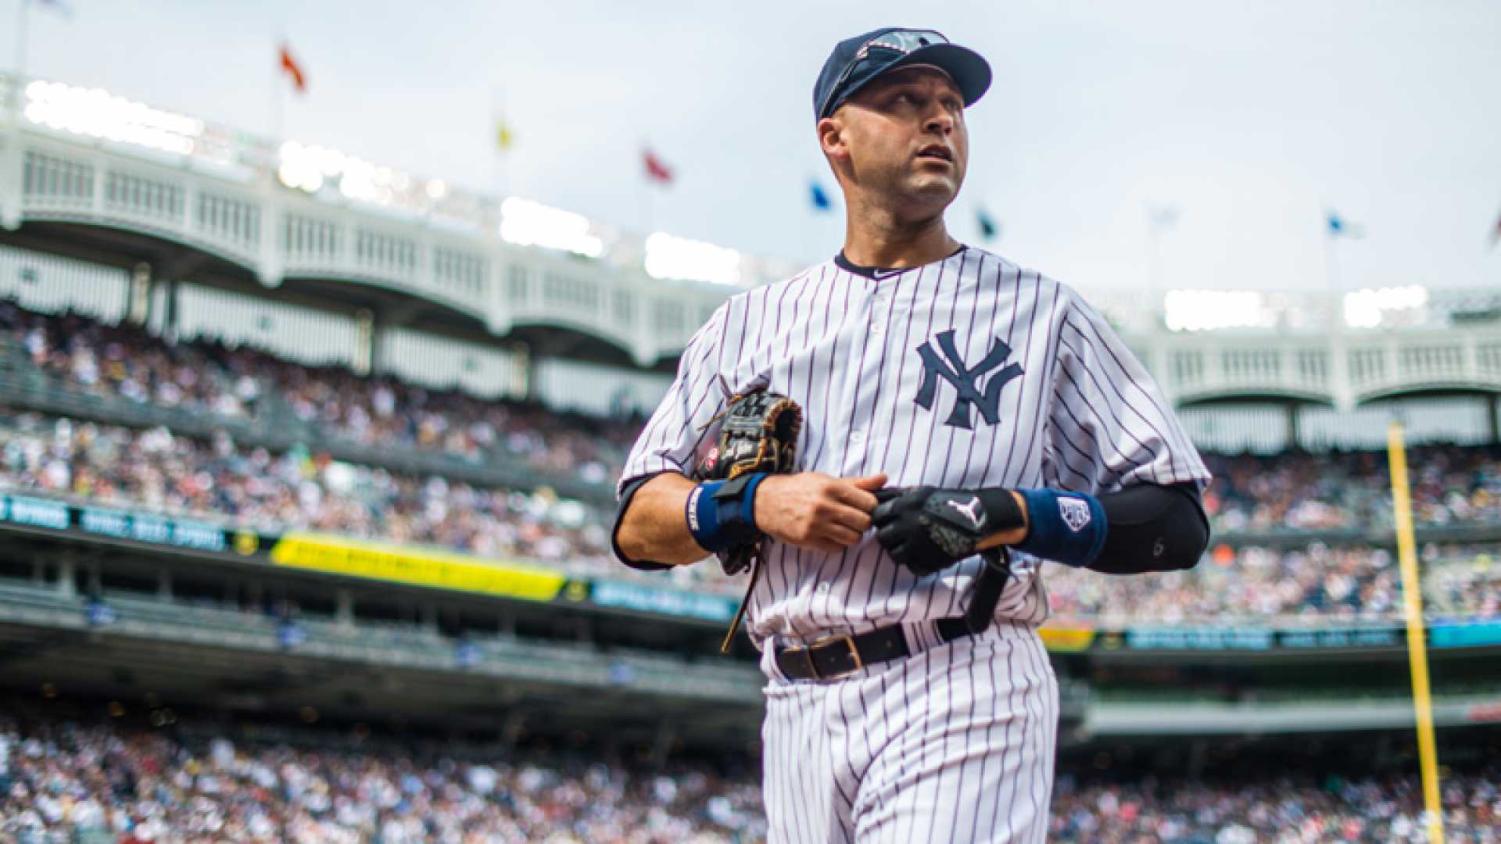 Derek Jeter is the Yankee you can't hate - The Boston Globe